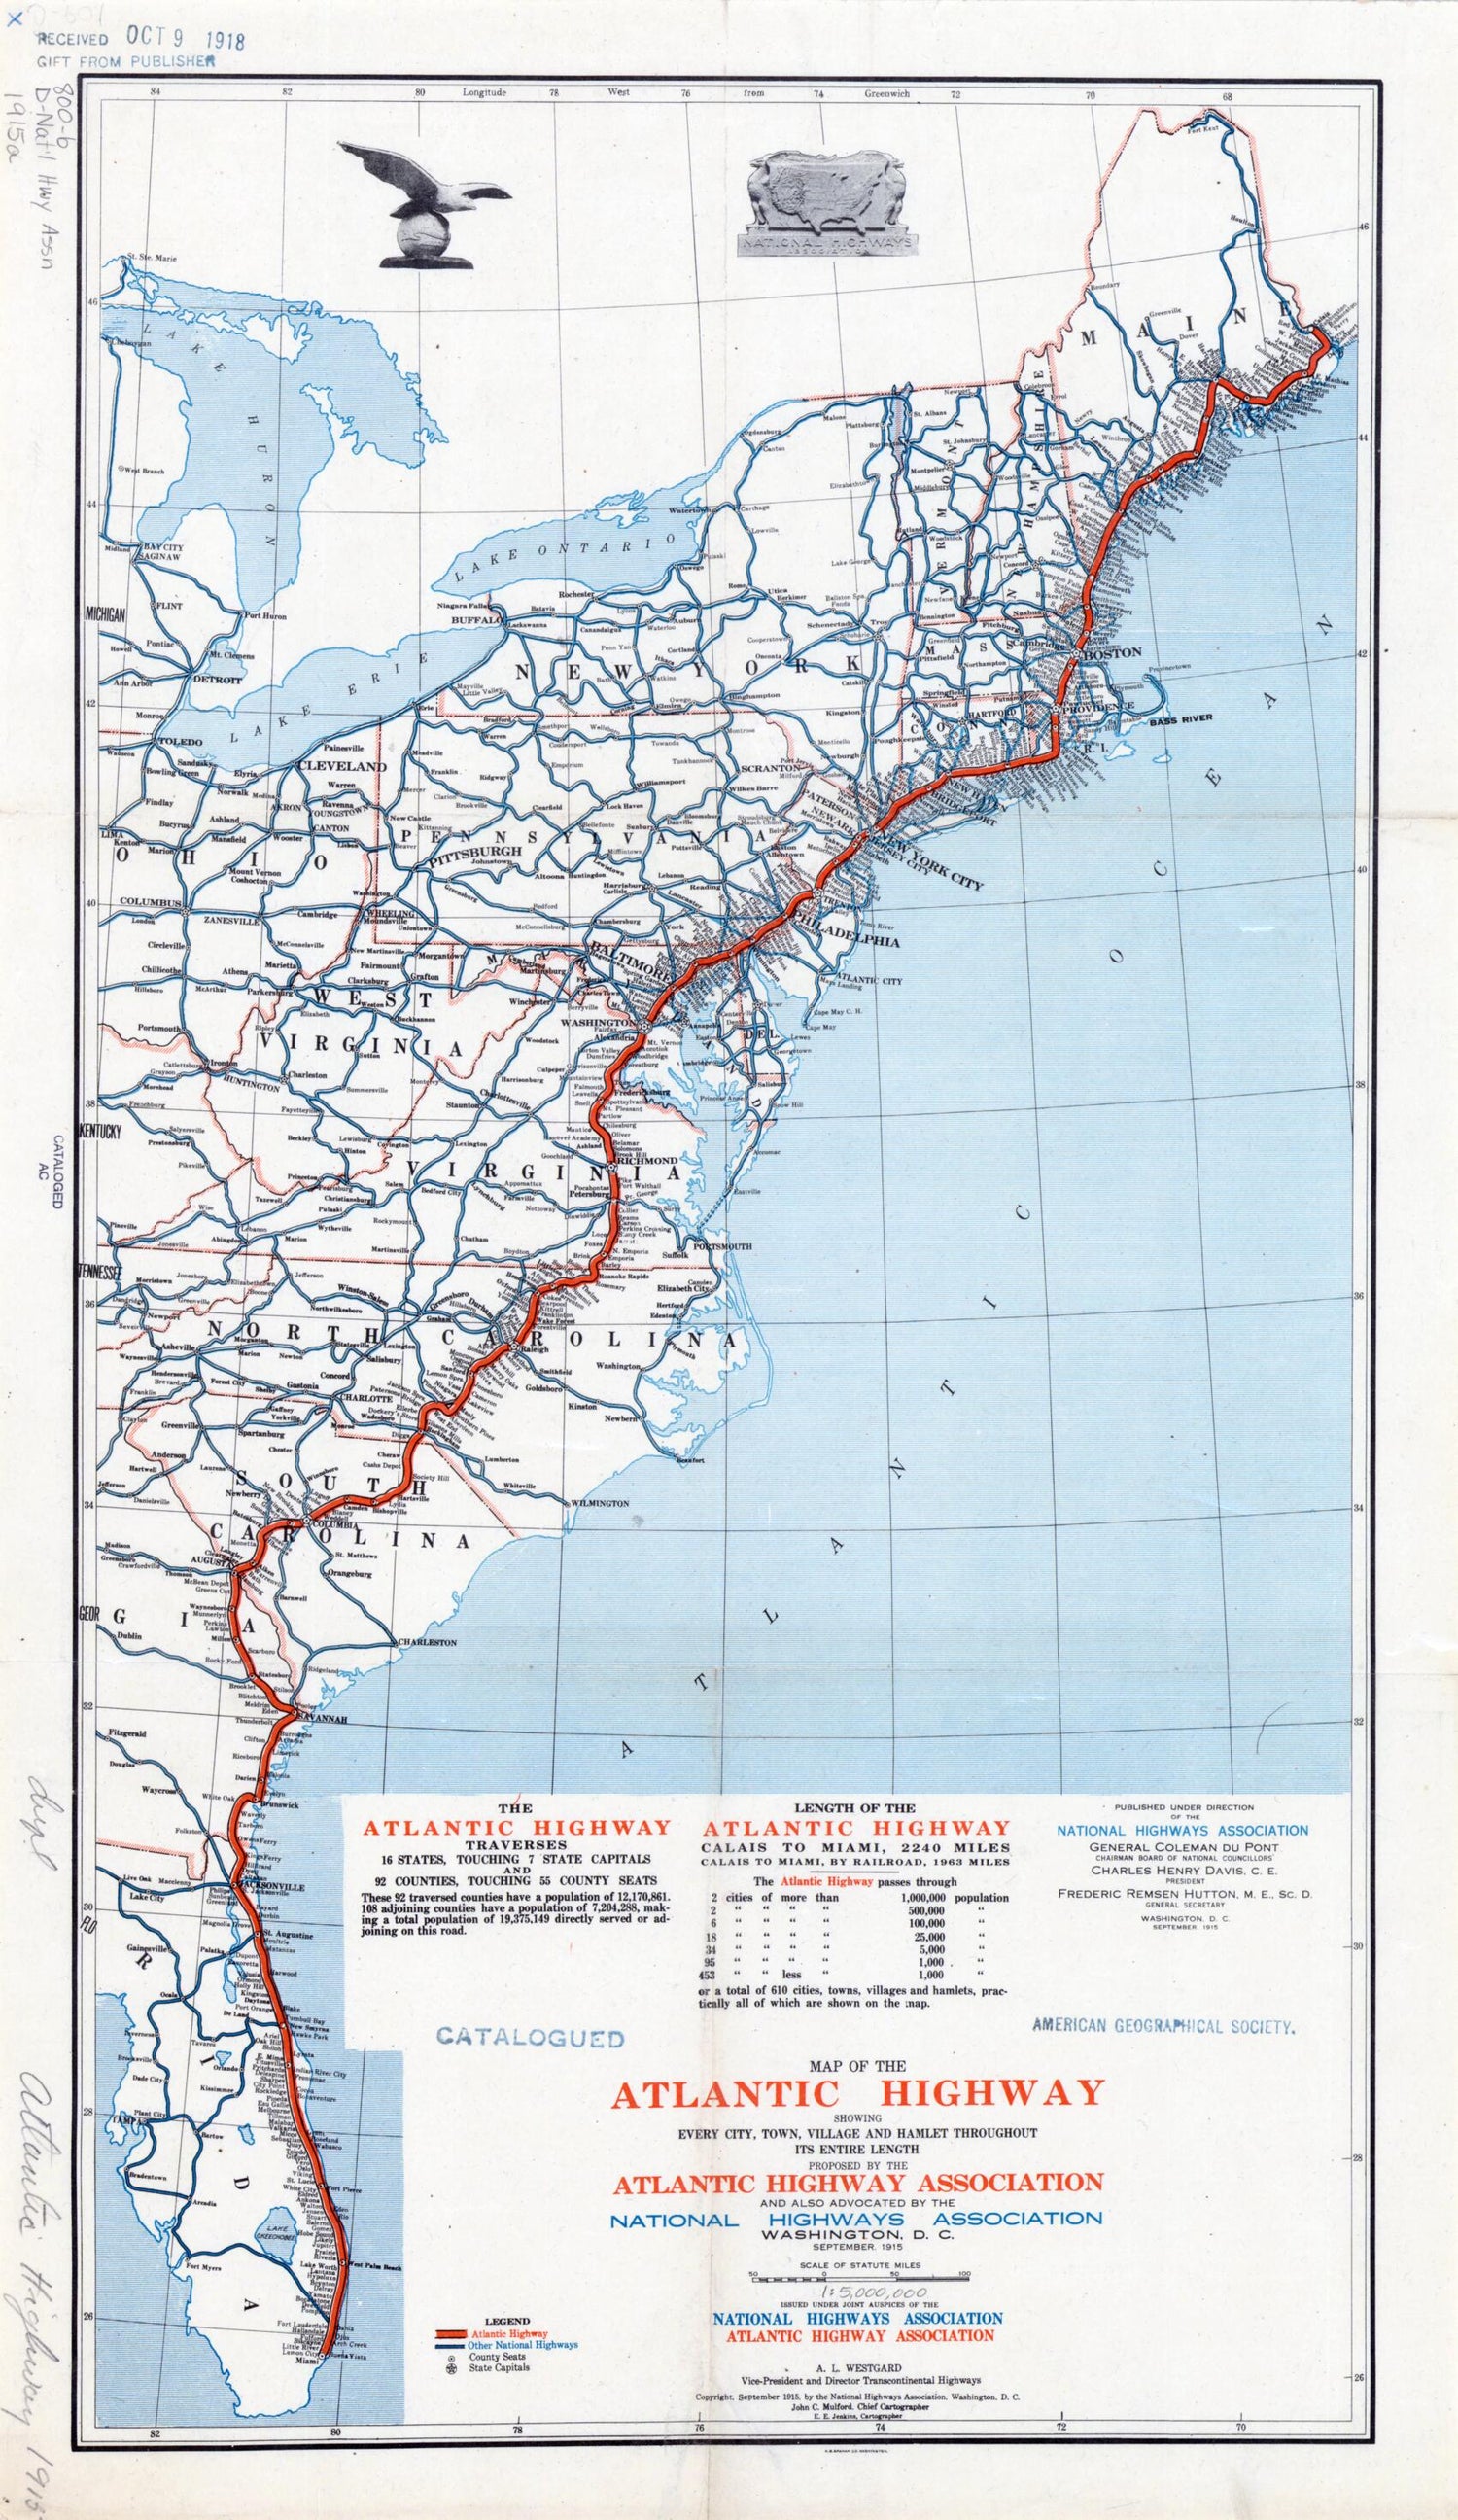 This old map of Map of the Atlantic Highway. (Map of the Atlantic Highway: Showing Every City, Town, Village and Hamlet Throughout Its Entire Length) from 1915 was created by  Atlantic Highway Association, E. E. Jenkins, John C. Mulford,  National Highwa